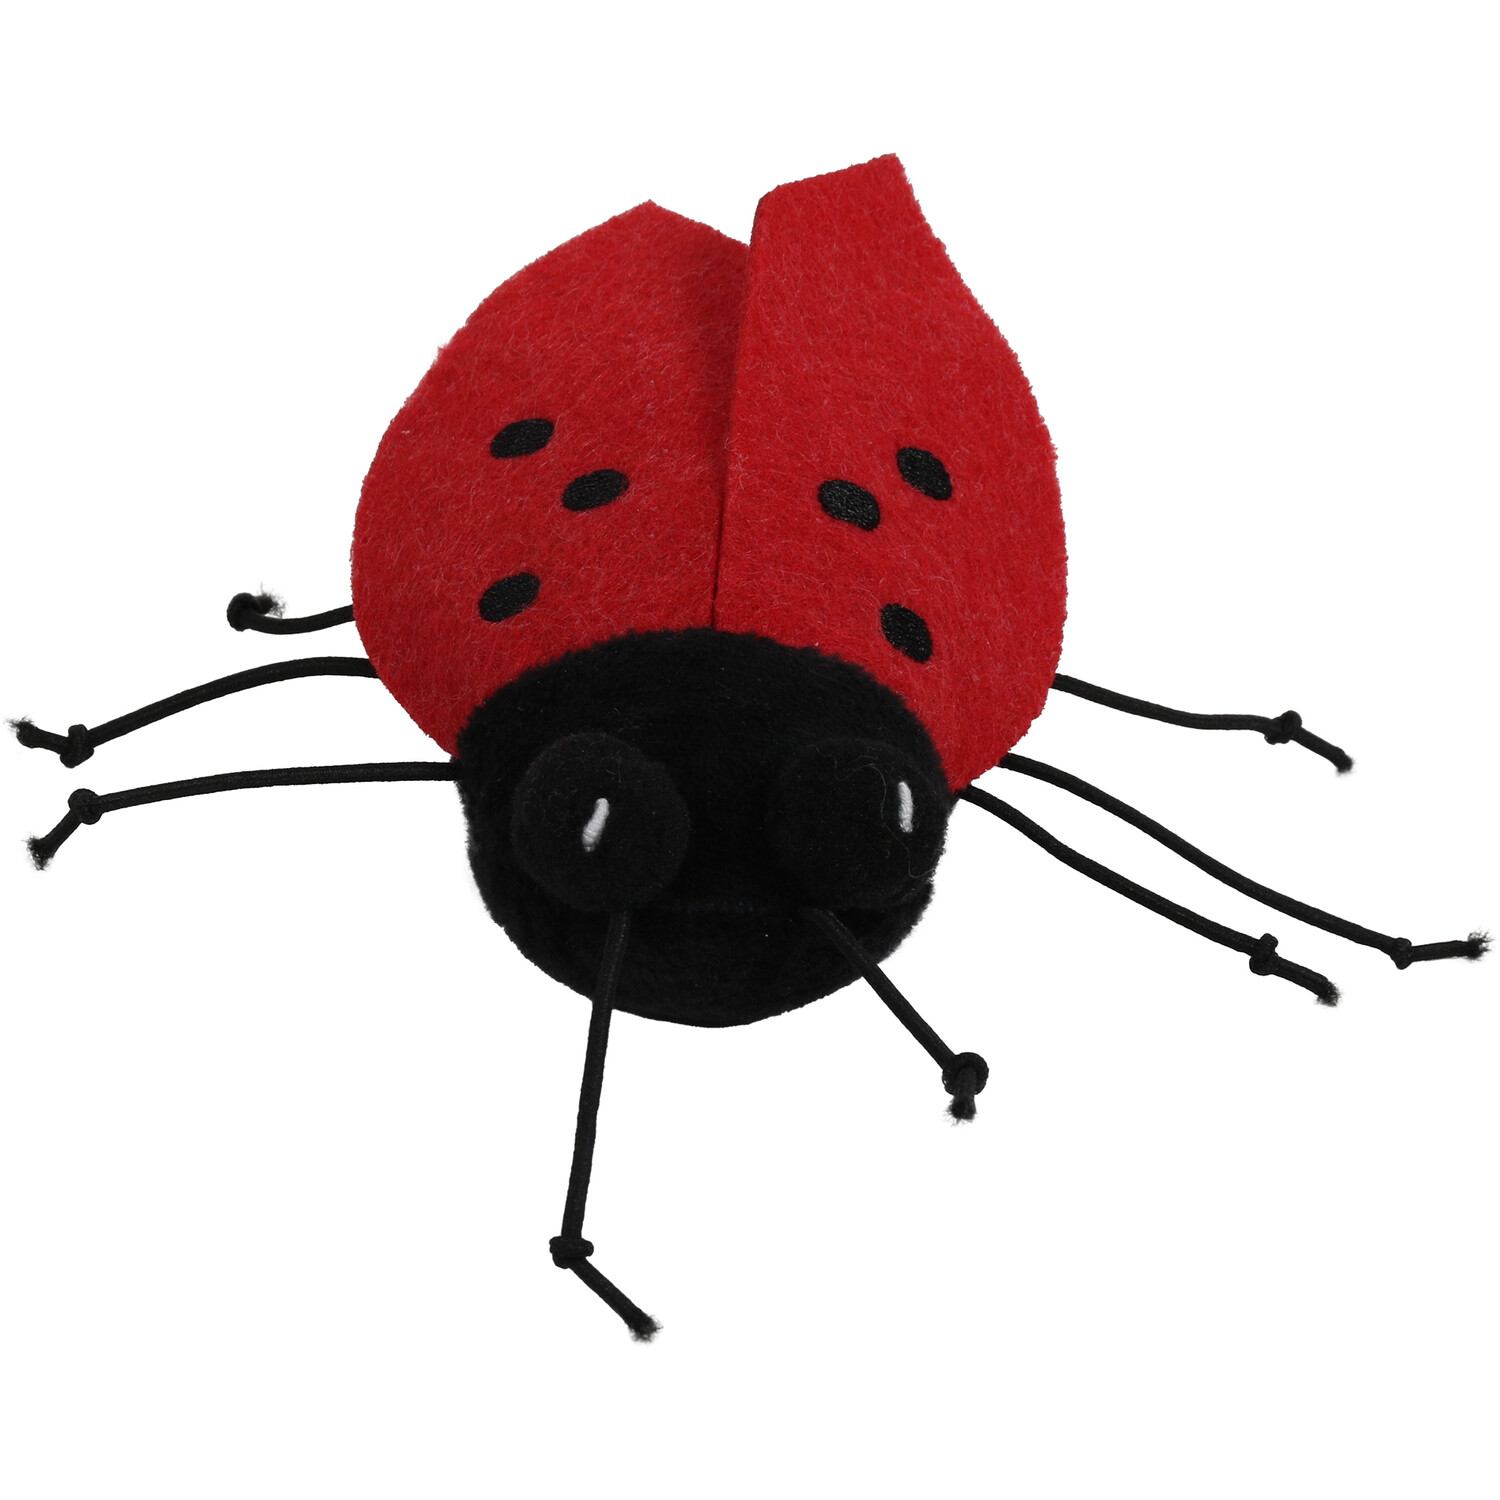 Buzzing Insect Cat Toy - Red Image 2